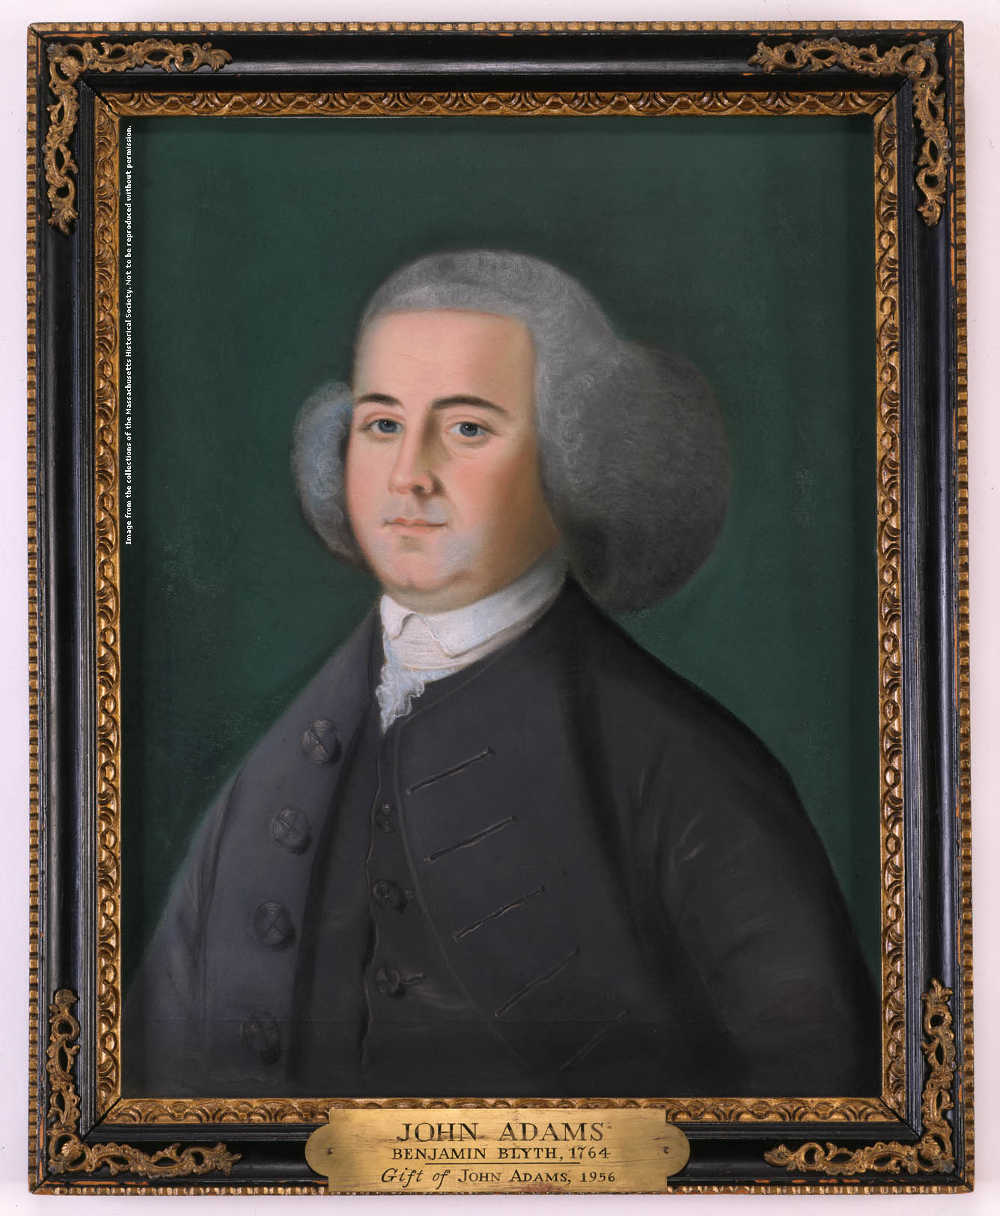 These pastel portraits of John and Abigail Adams (c.1766) were made by Benjamin Blyth of Salem. They are the earliest known likenesses of the couple. Image courtesy of the Massachusetts Historical Society.